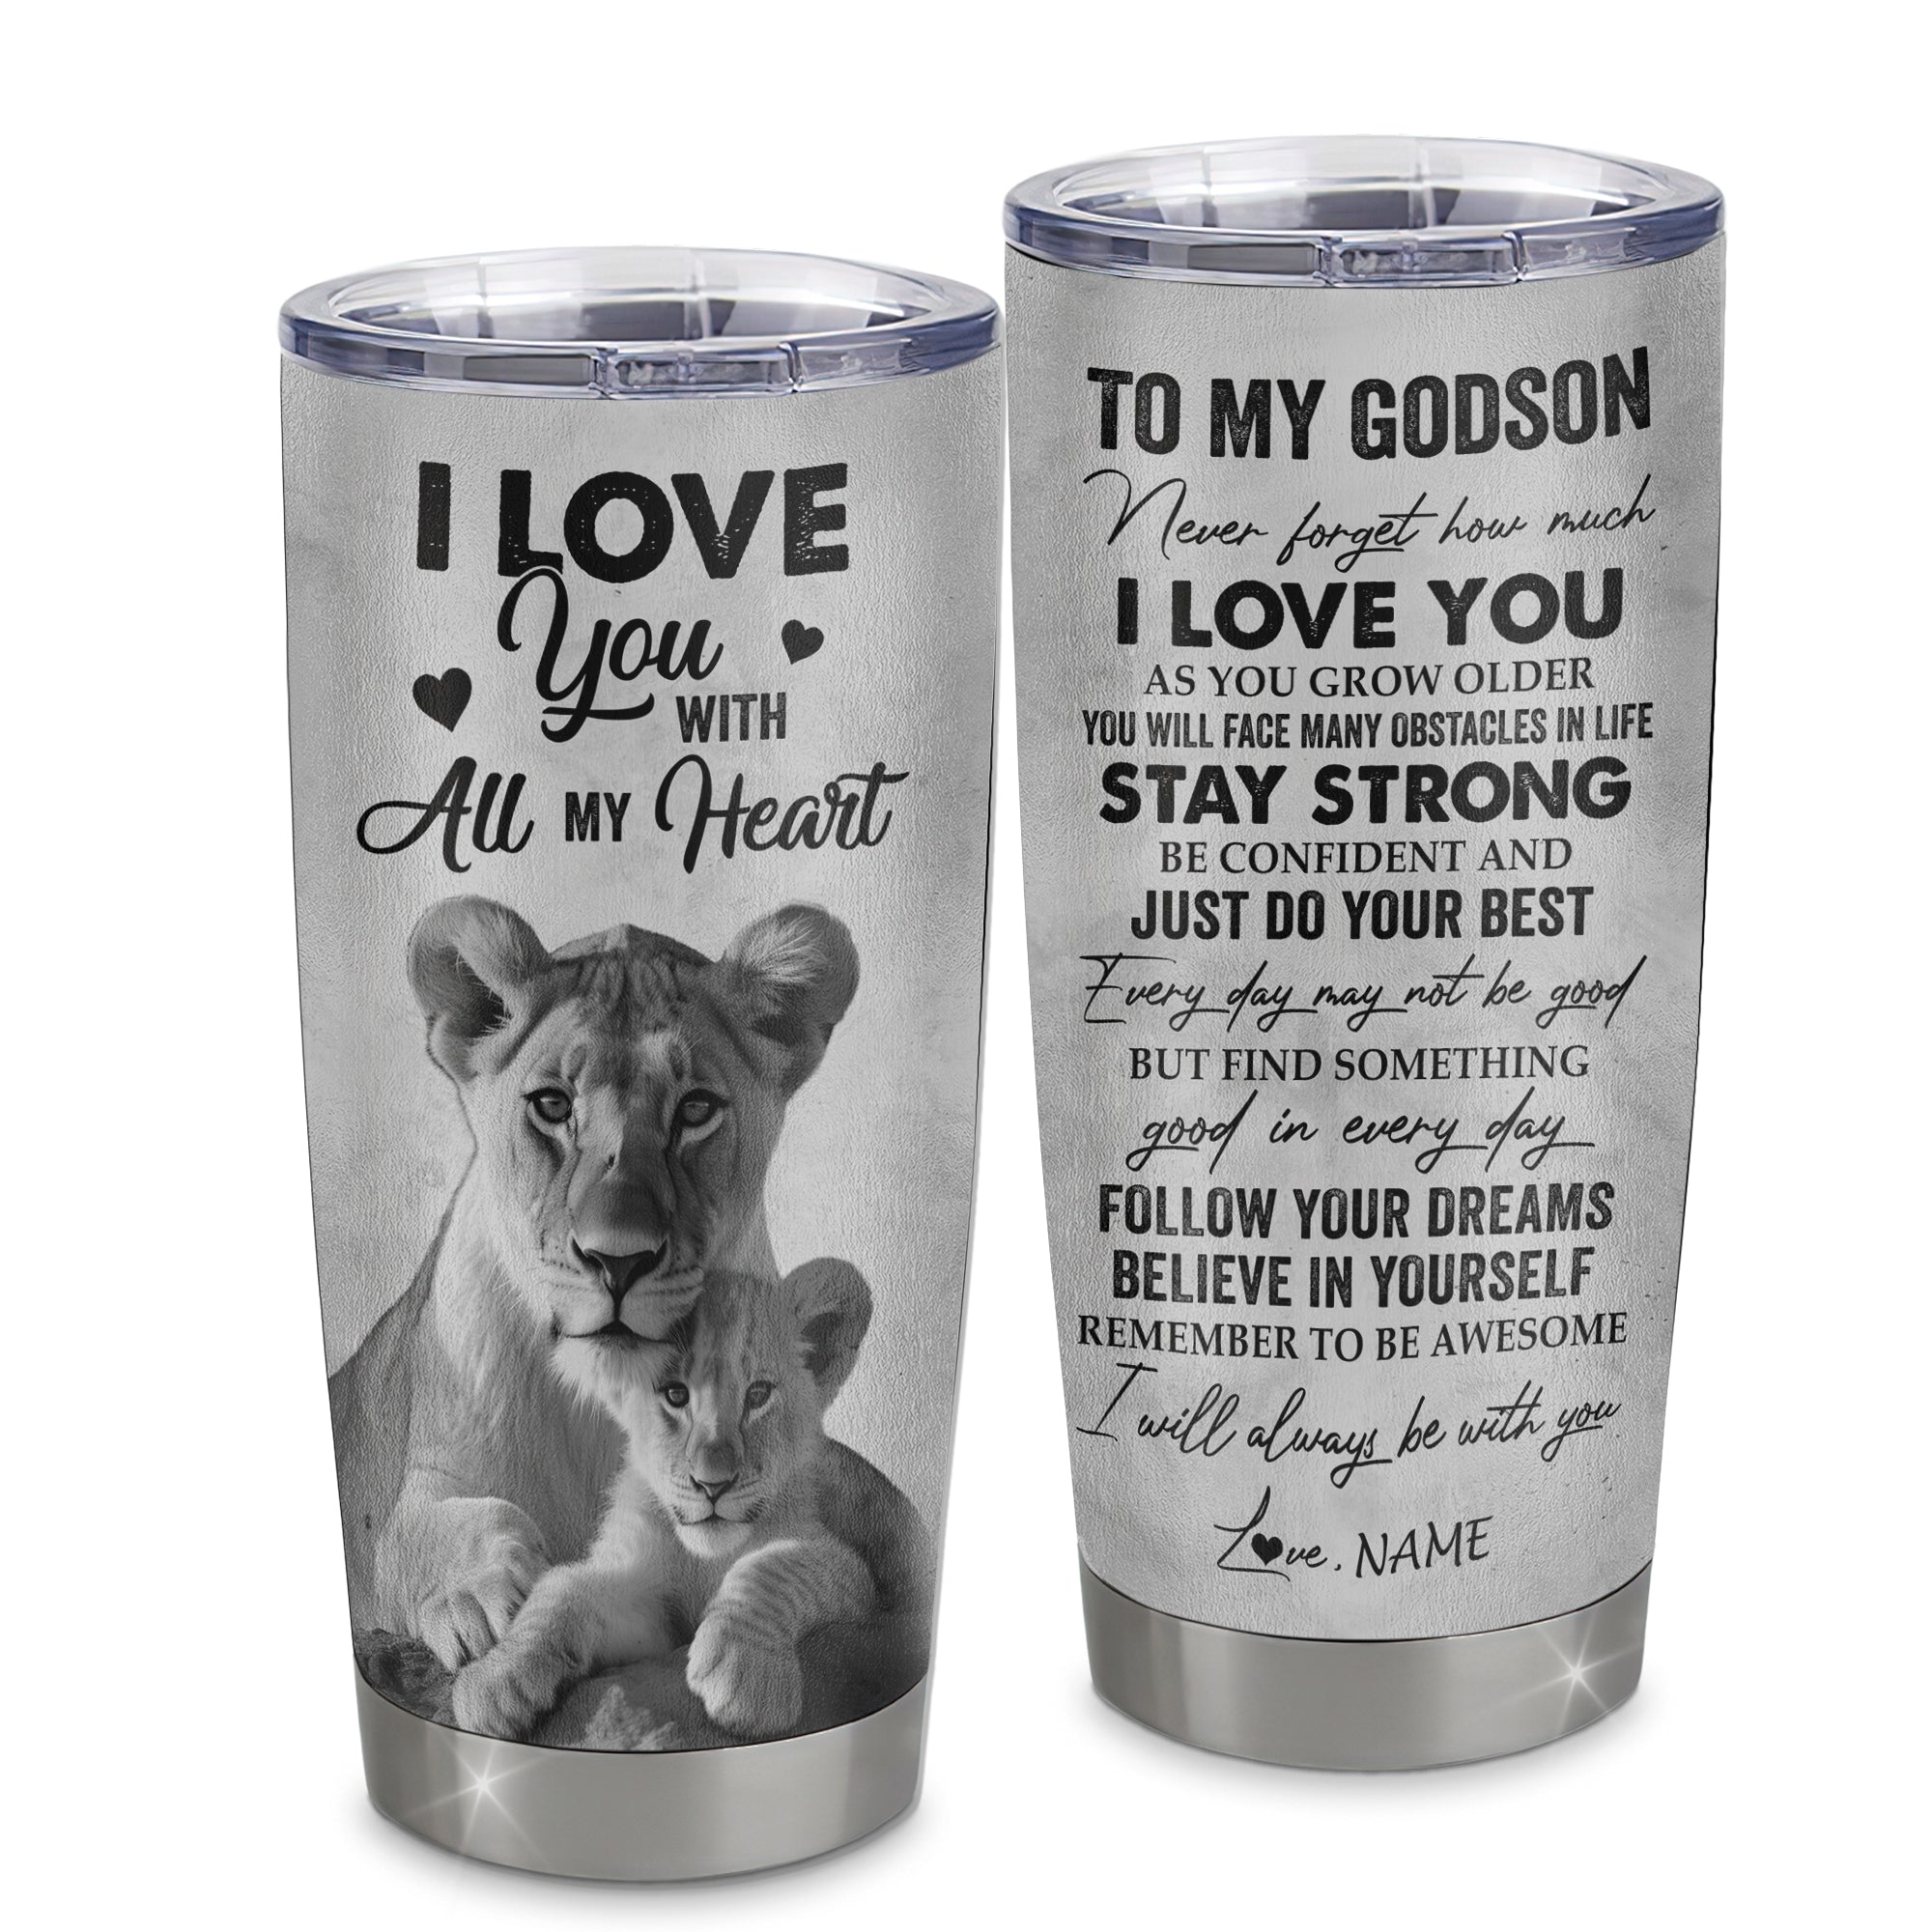 Personalized_To_My_Godson_Tumbler_From_Godmother_Stainless_Steel_Cup_I_Love_You_With_All_My_Heart_Godson_Birthday_Graduation_Christmas_Travel_Mug_Tumbler_mockup_1.jpg